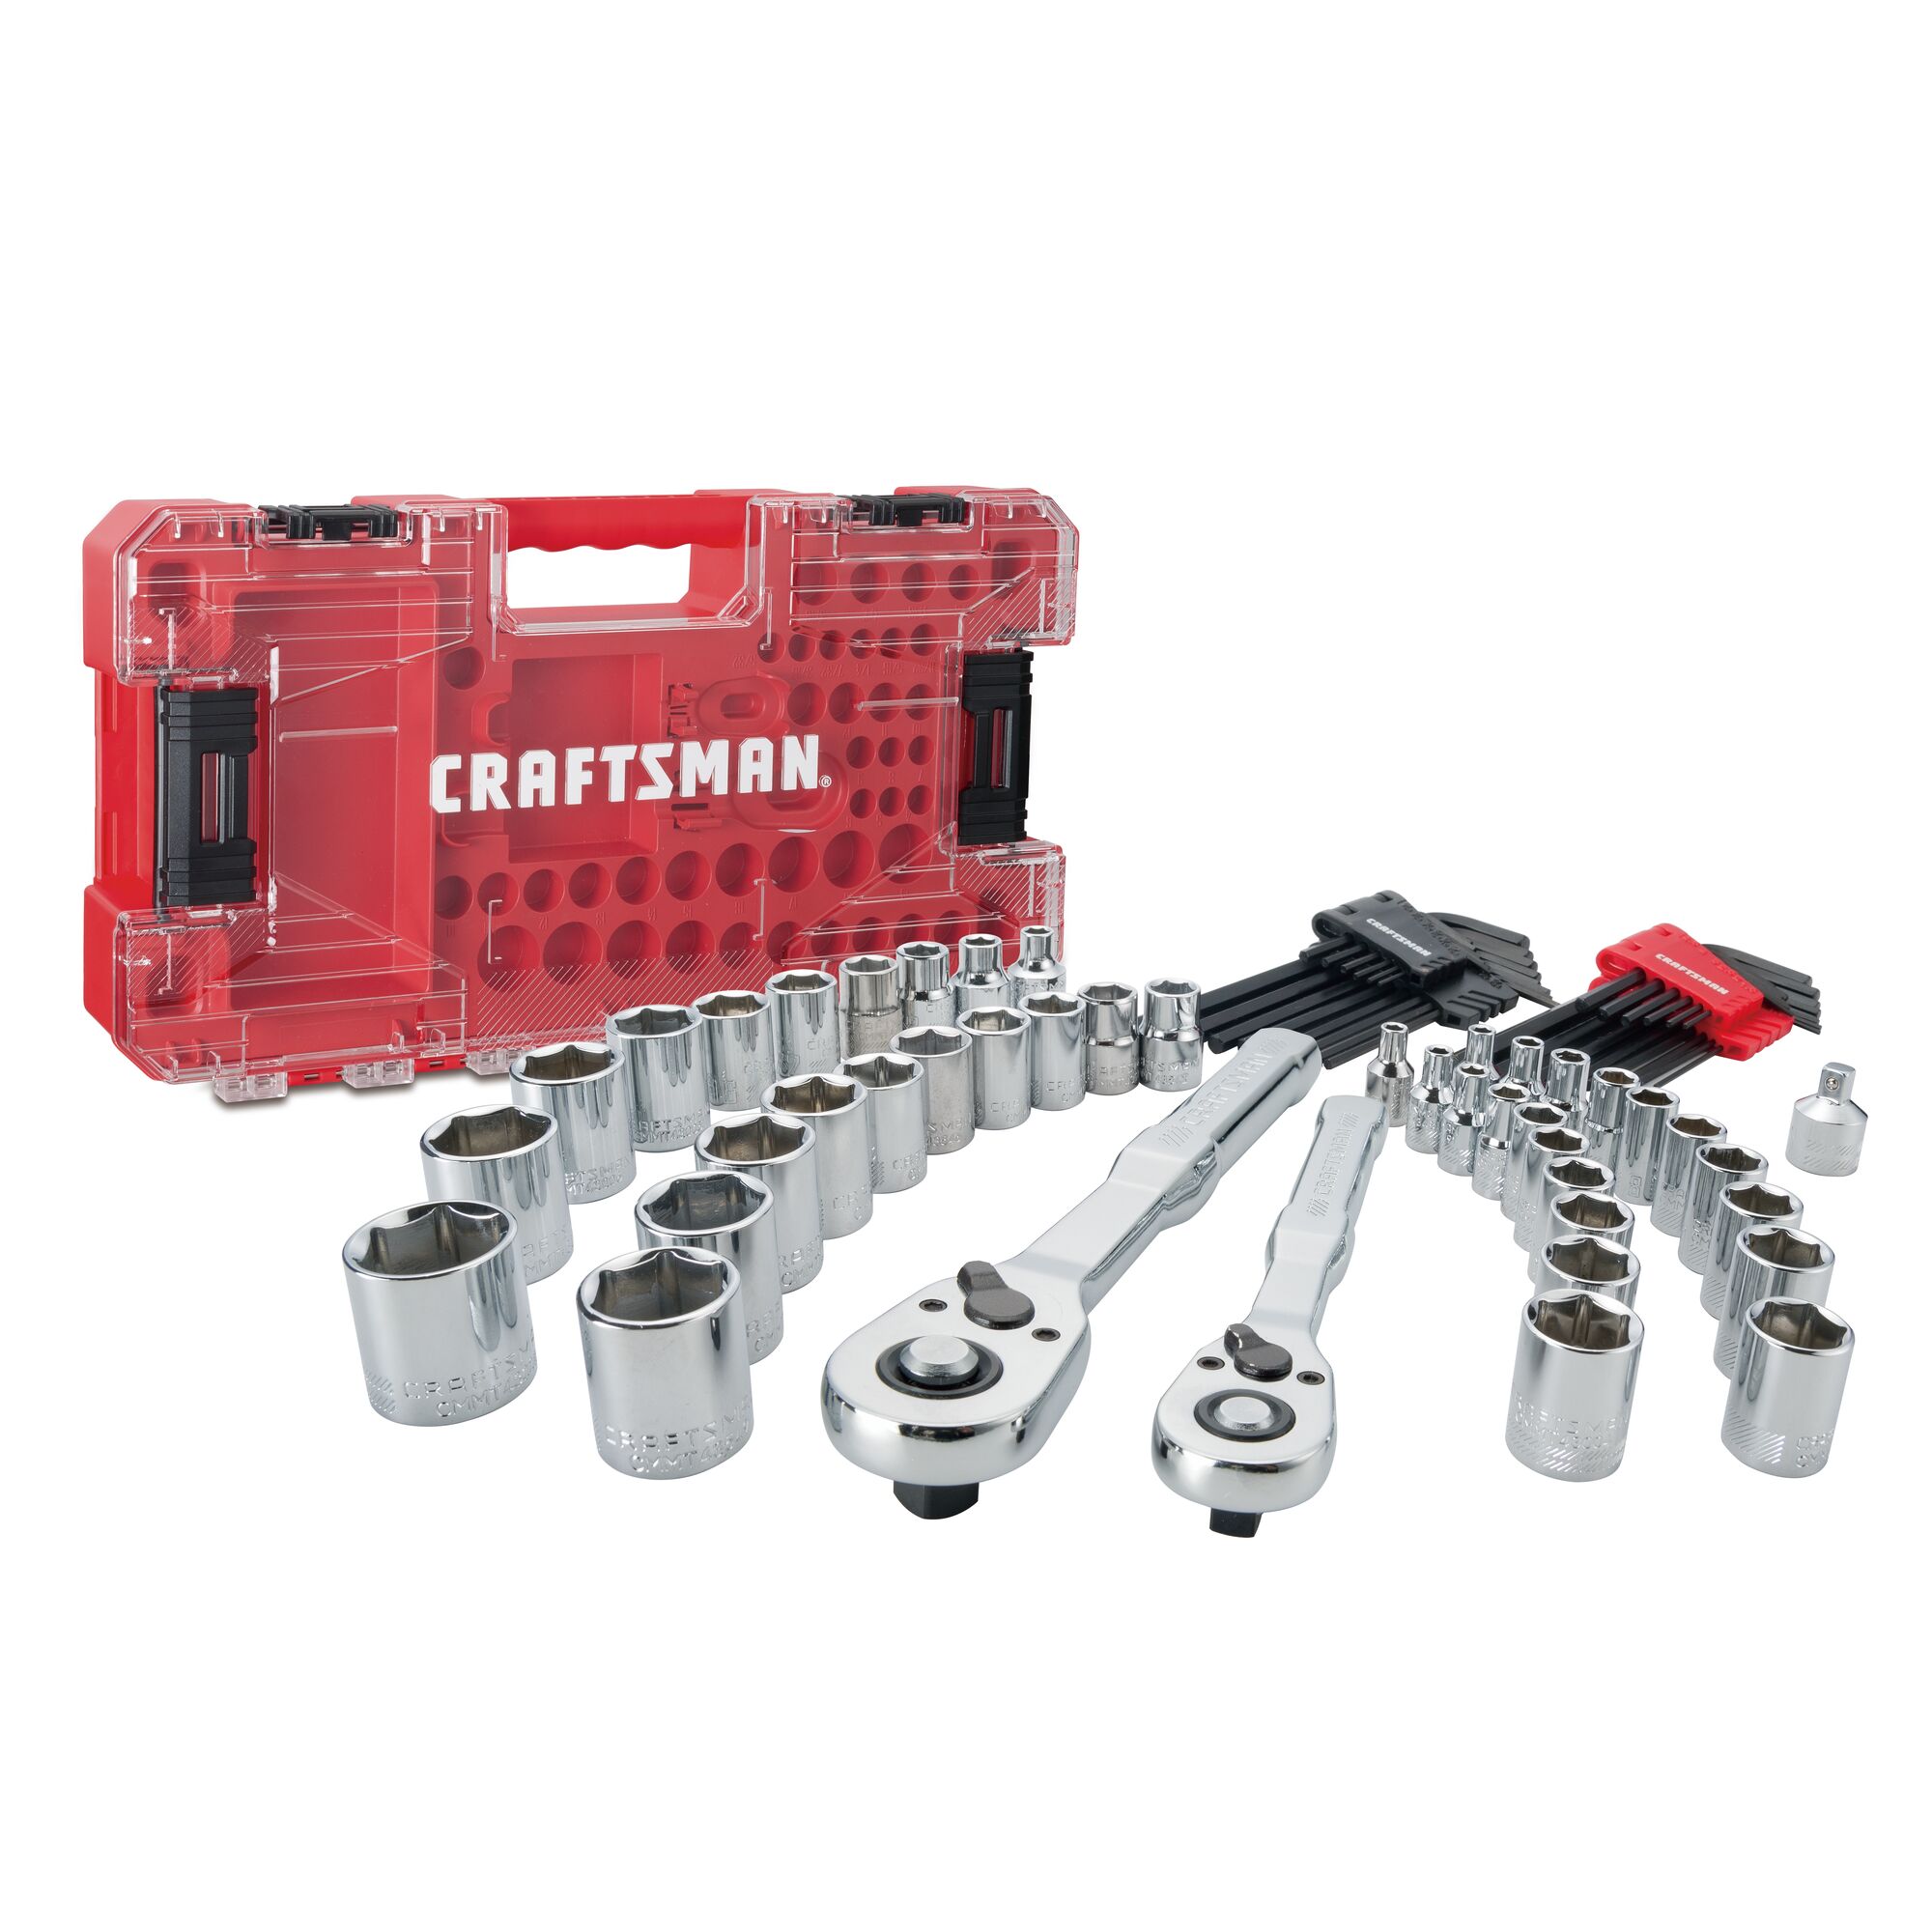 CRAFTSMAN 71 Piece Mechanics Tool Set Laid Out on White Background